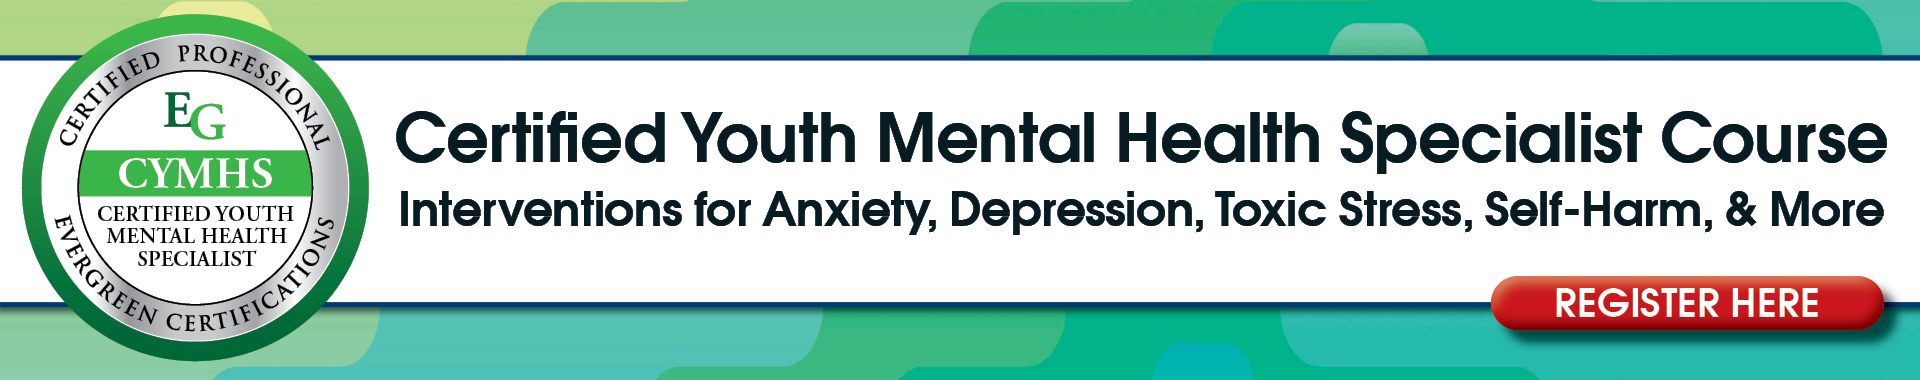 Certified Youth Mental Health Specialist Course